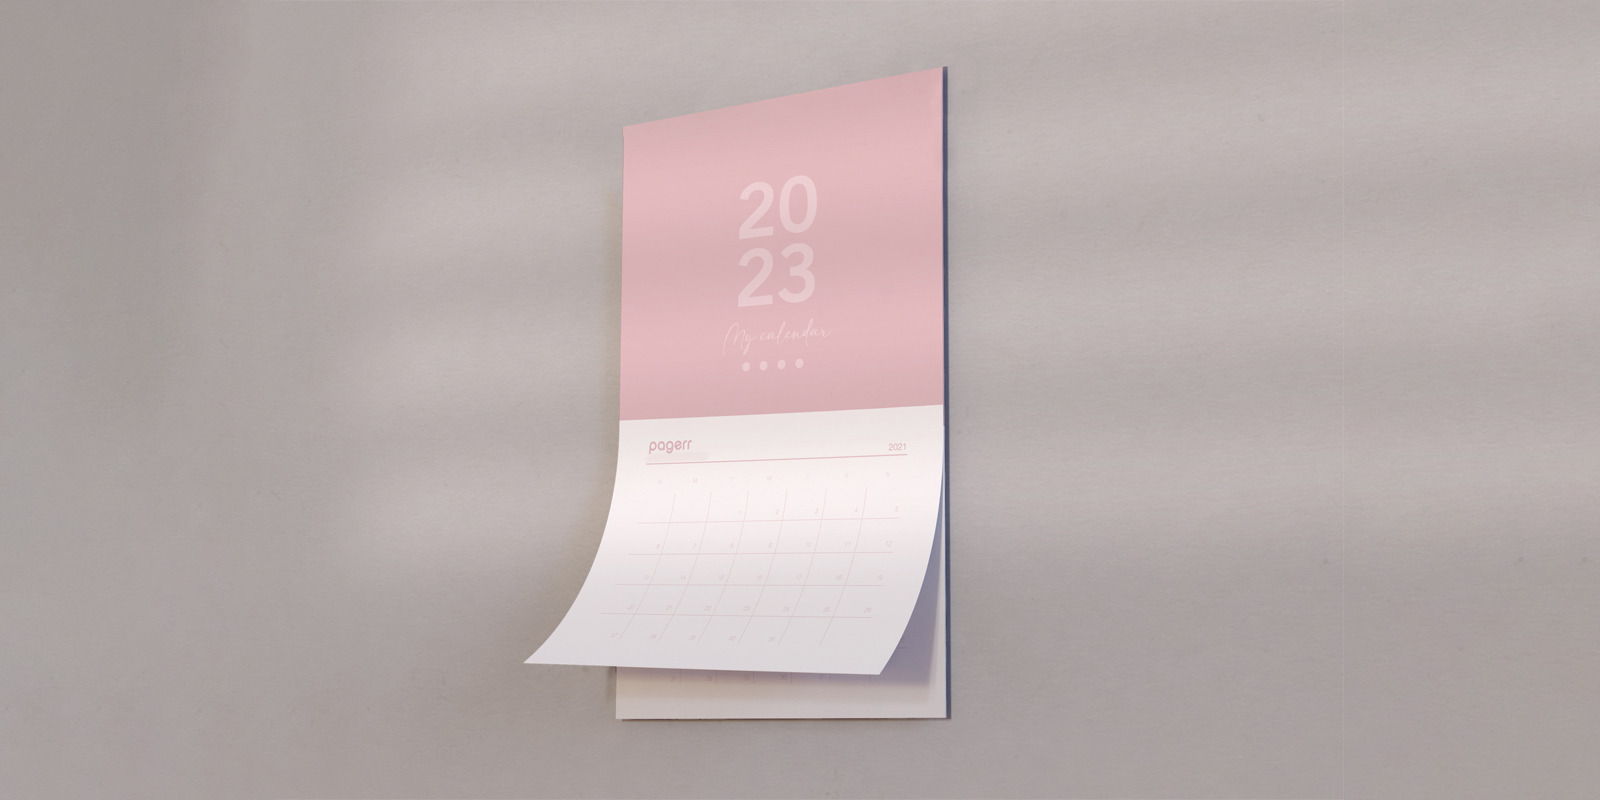 Magnetic calendars in Wollongong - Print with Pagerr